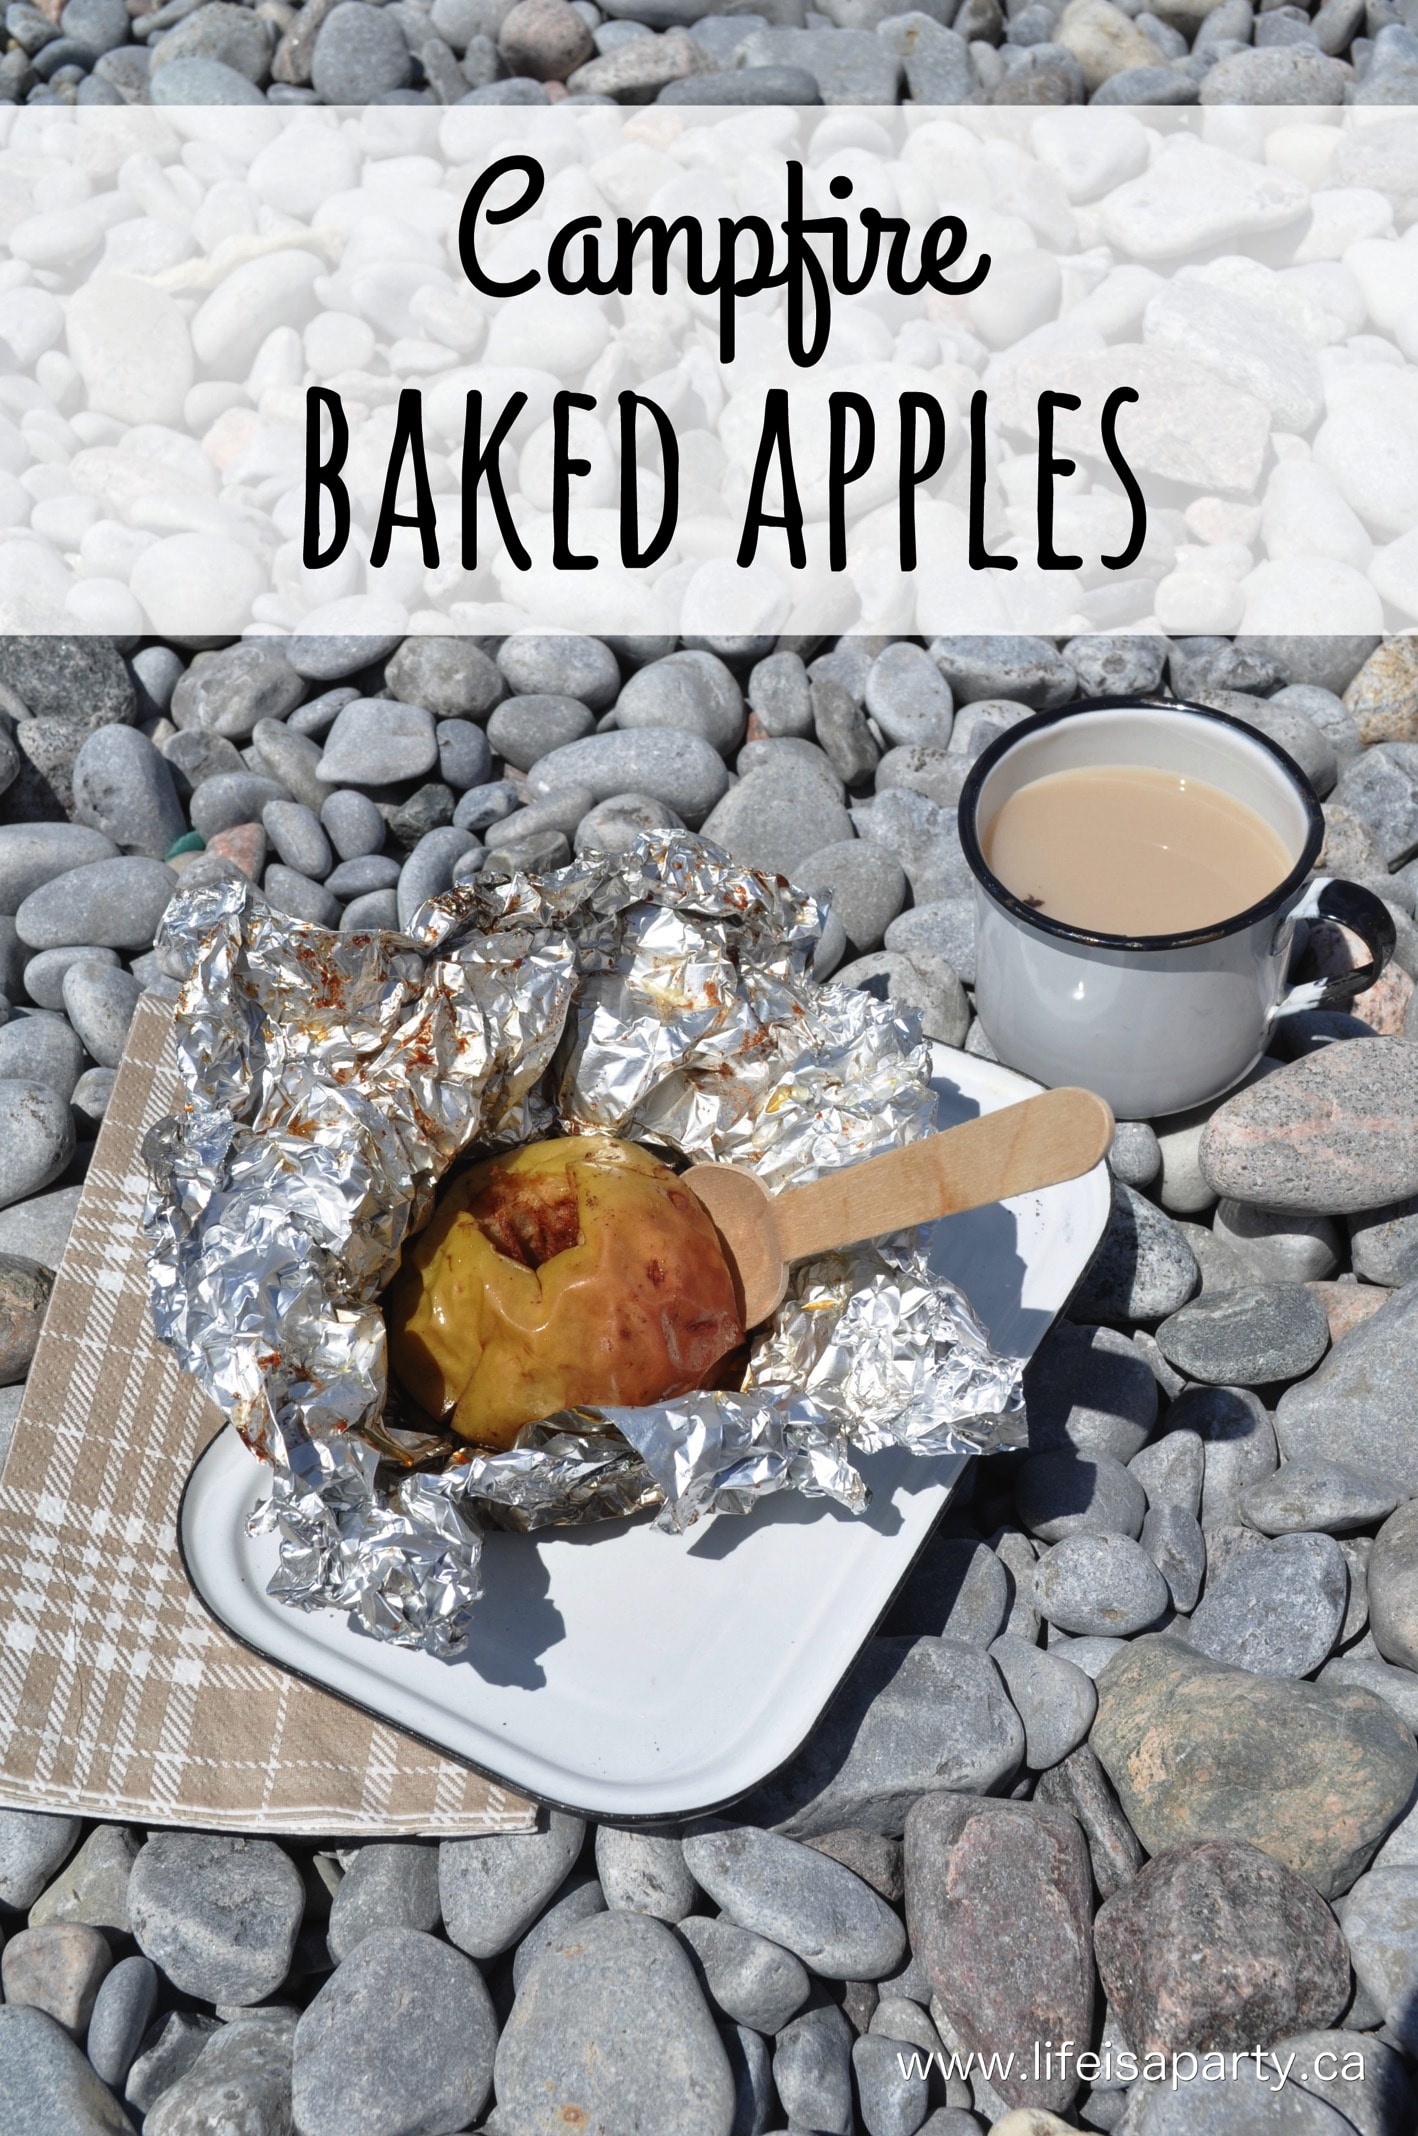 Campfire Baked Apples: The perfect camping recipe, just a few ingredients, and a sweet, delicious treat everyone is sure to love!